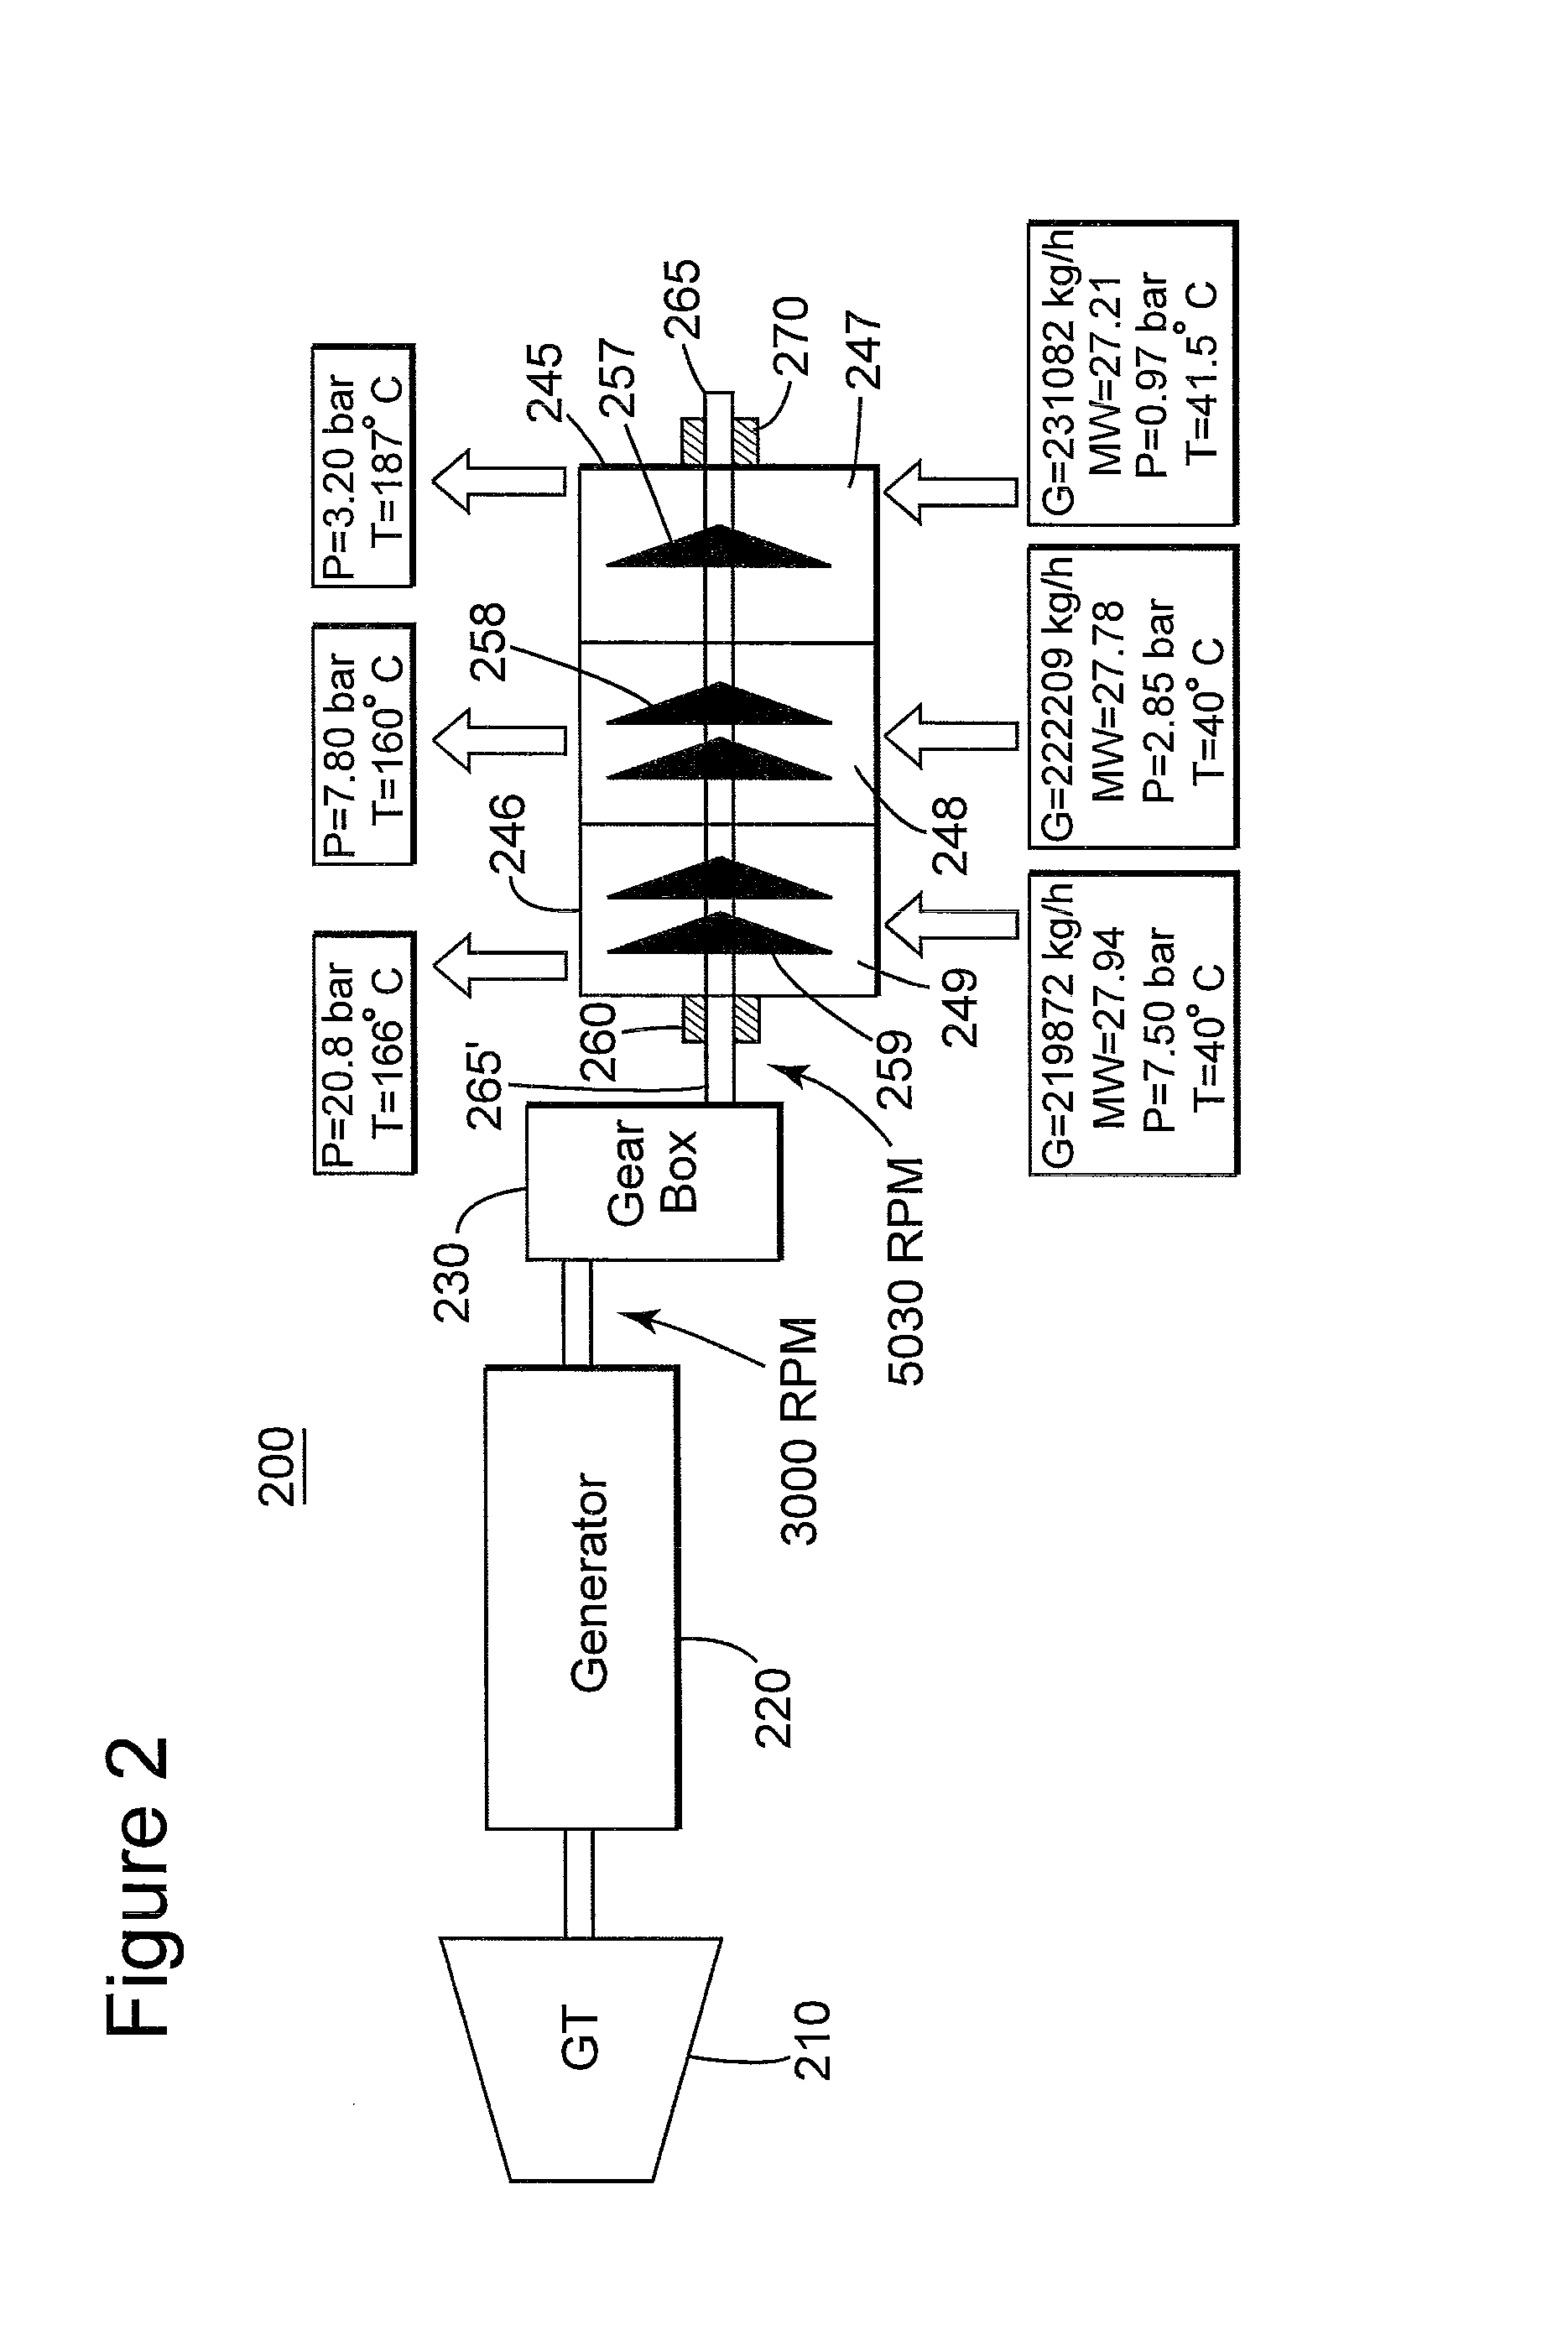 High pressure ratio compressors with multiple intercooling and related methods